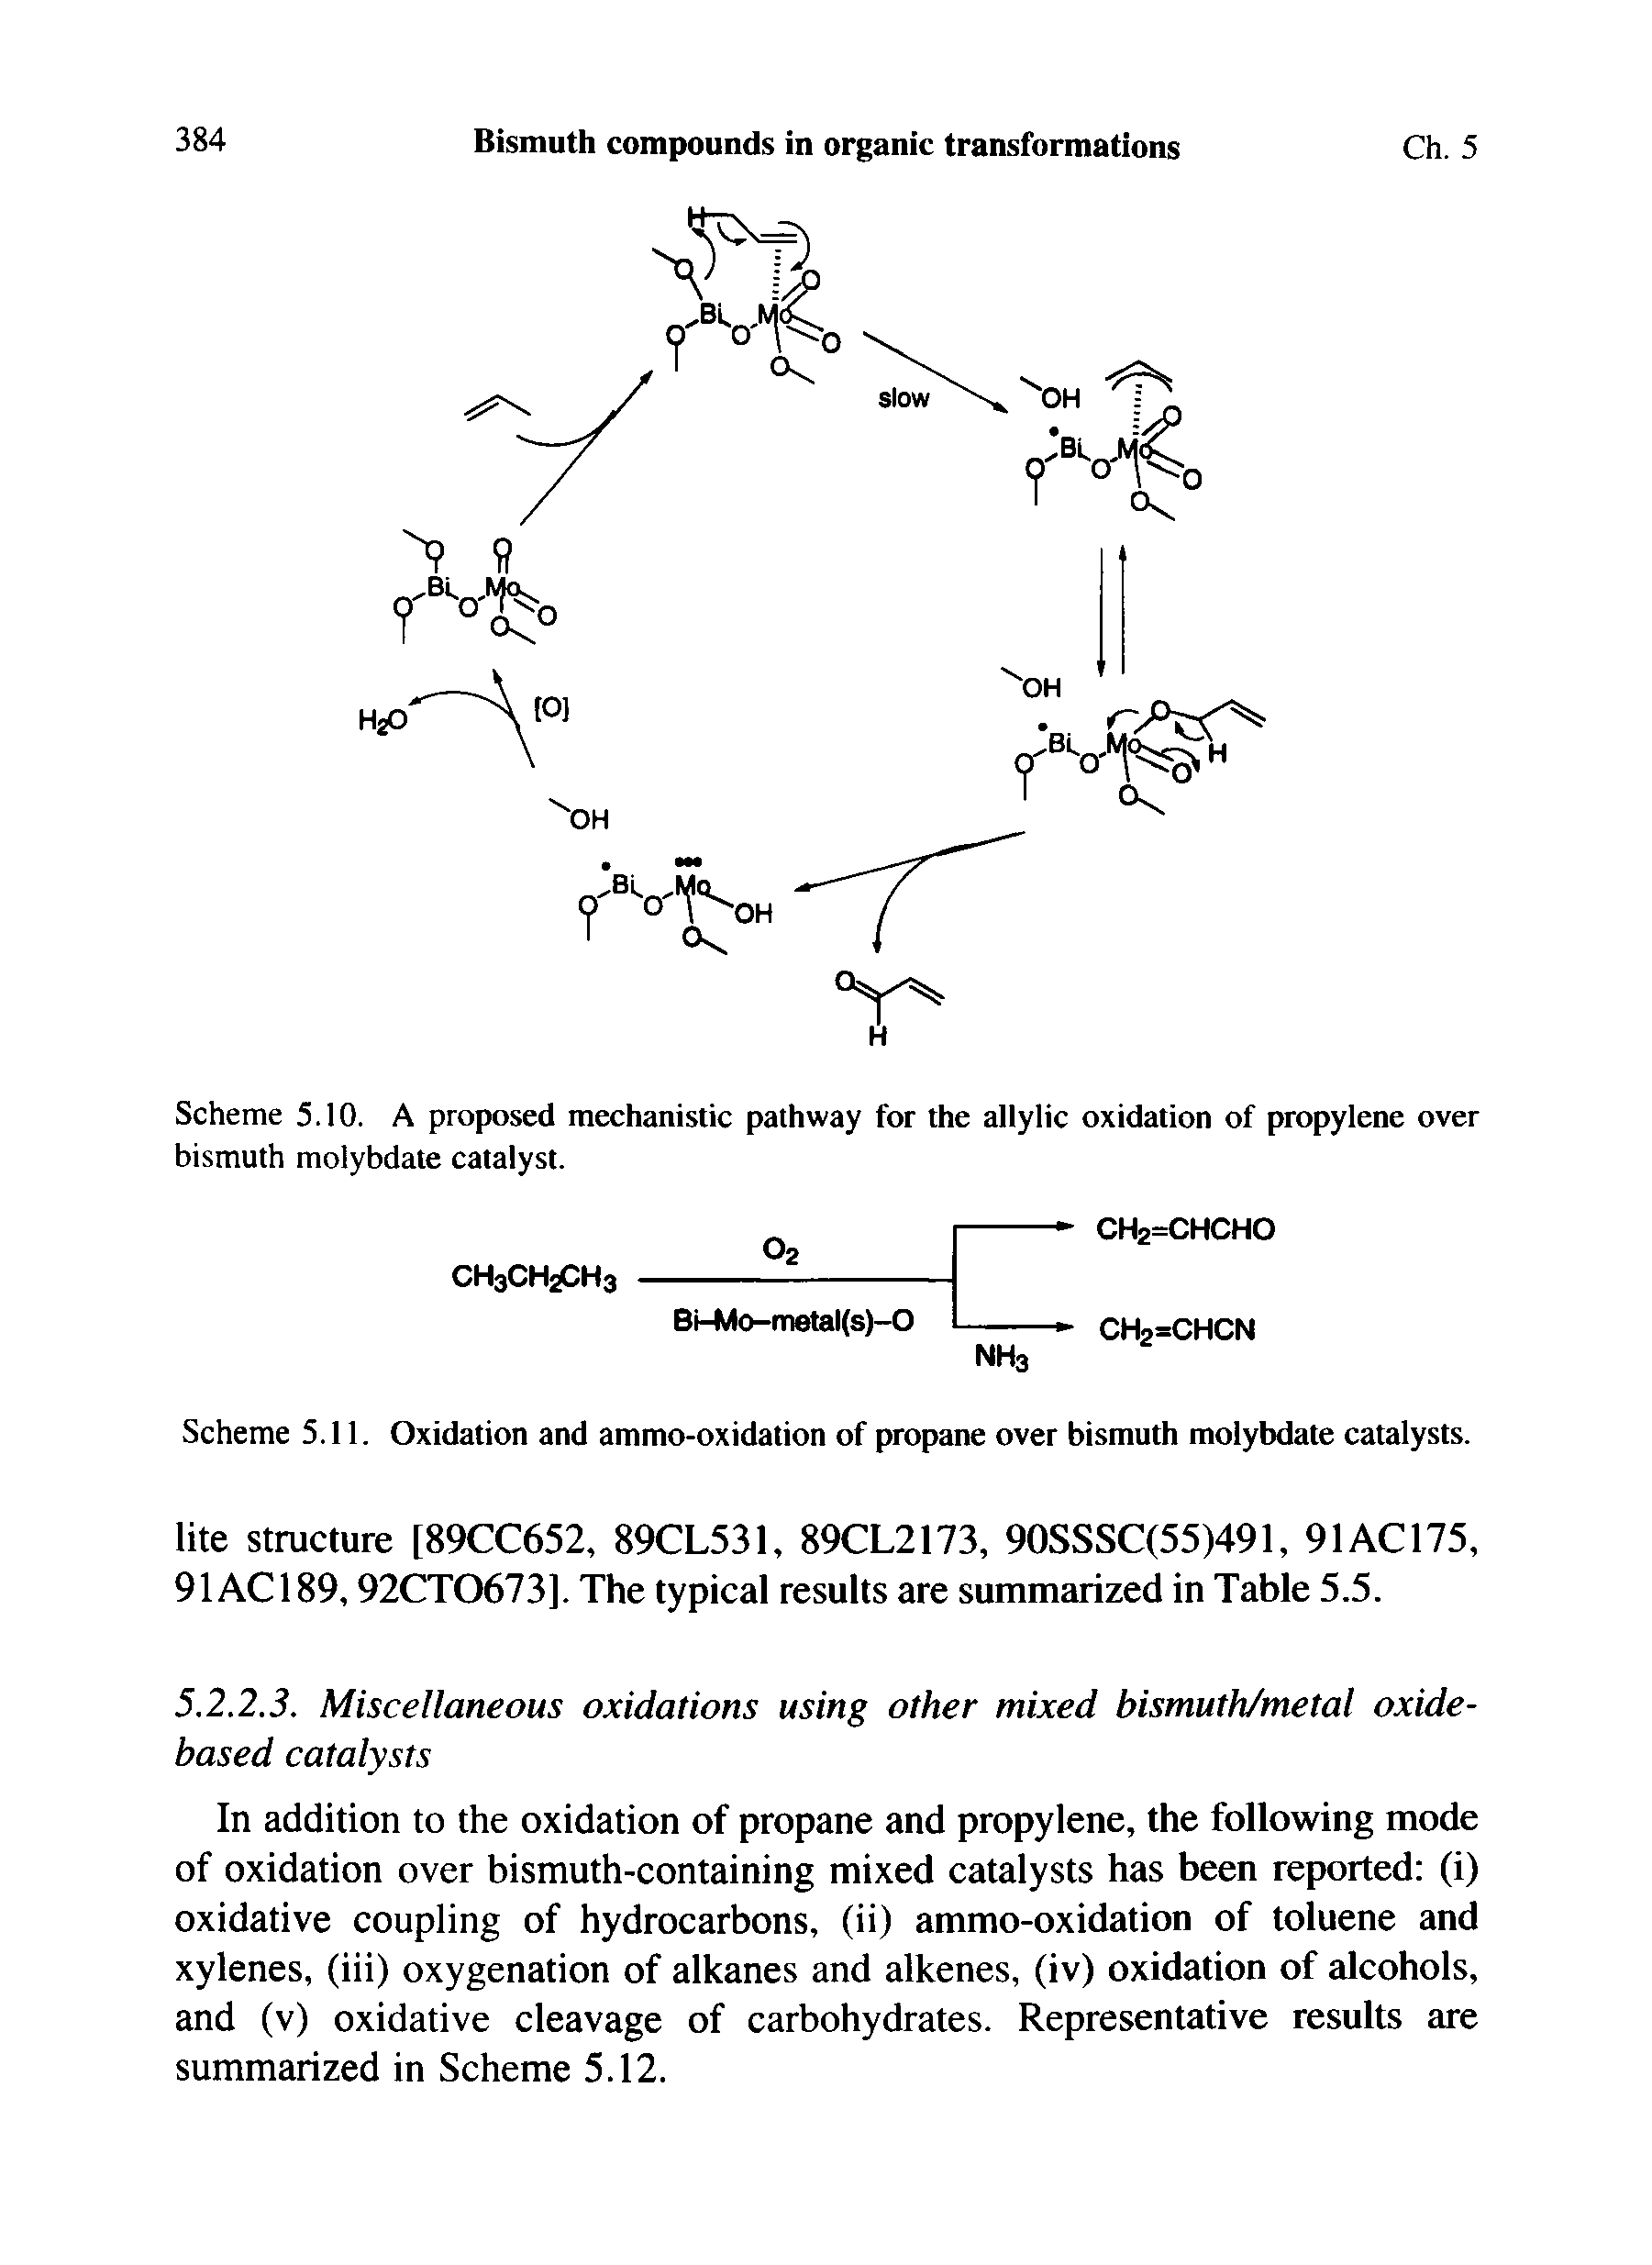 Scheme 5.10. A proposed mechanistic pathway for the allylic oxidation of propylene over bismuth molybdate catalyst.